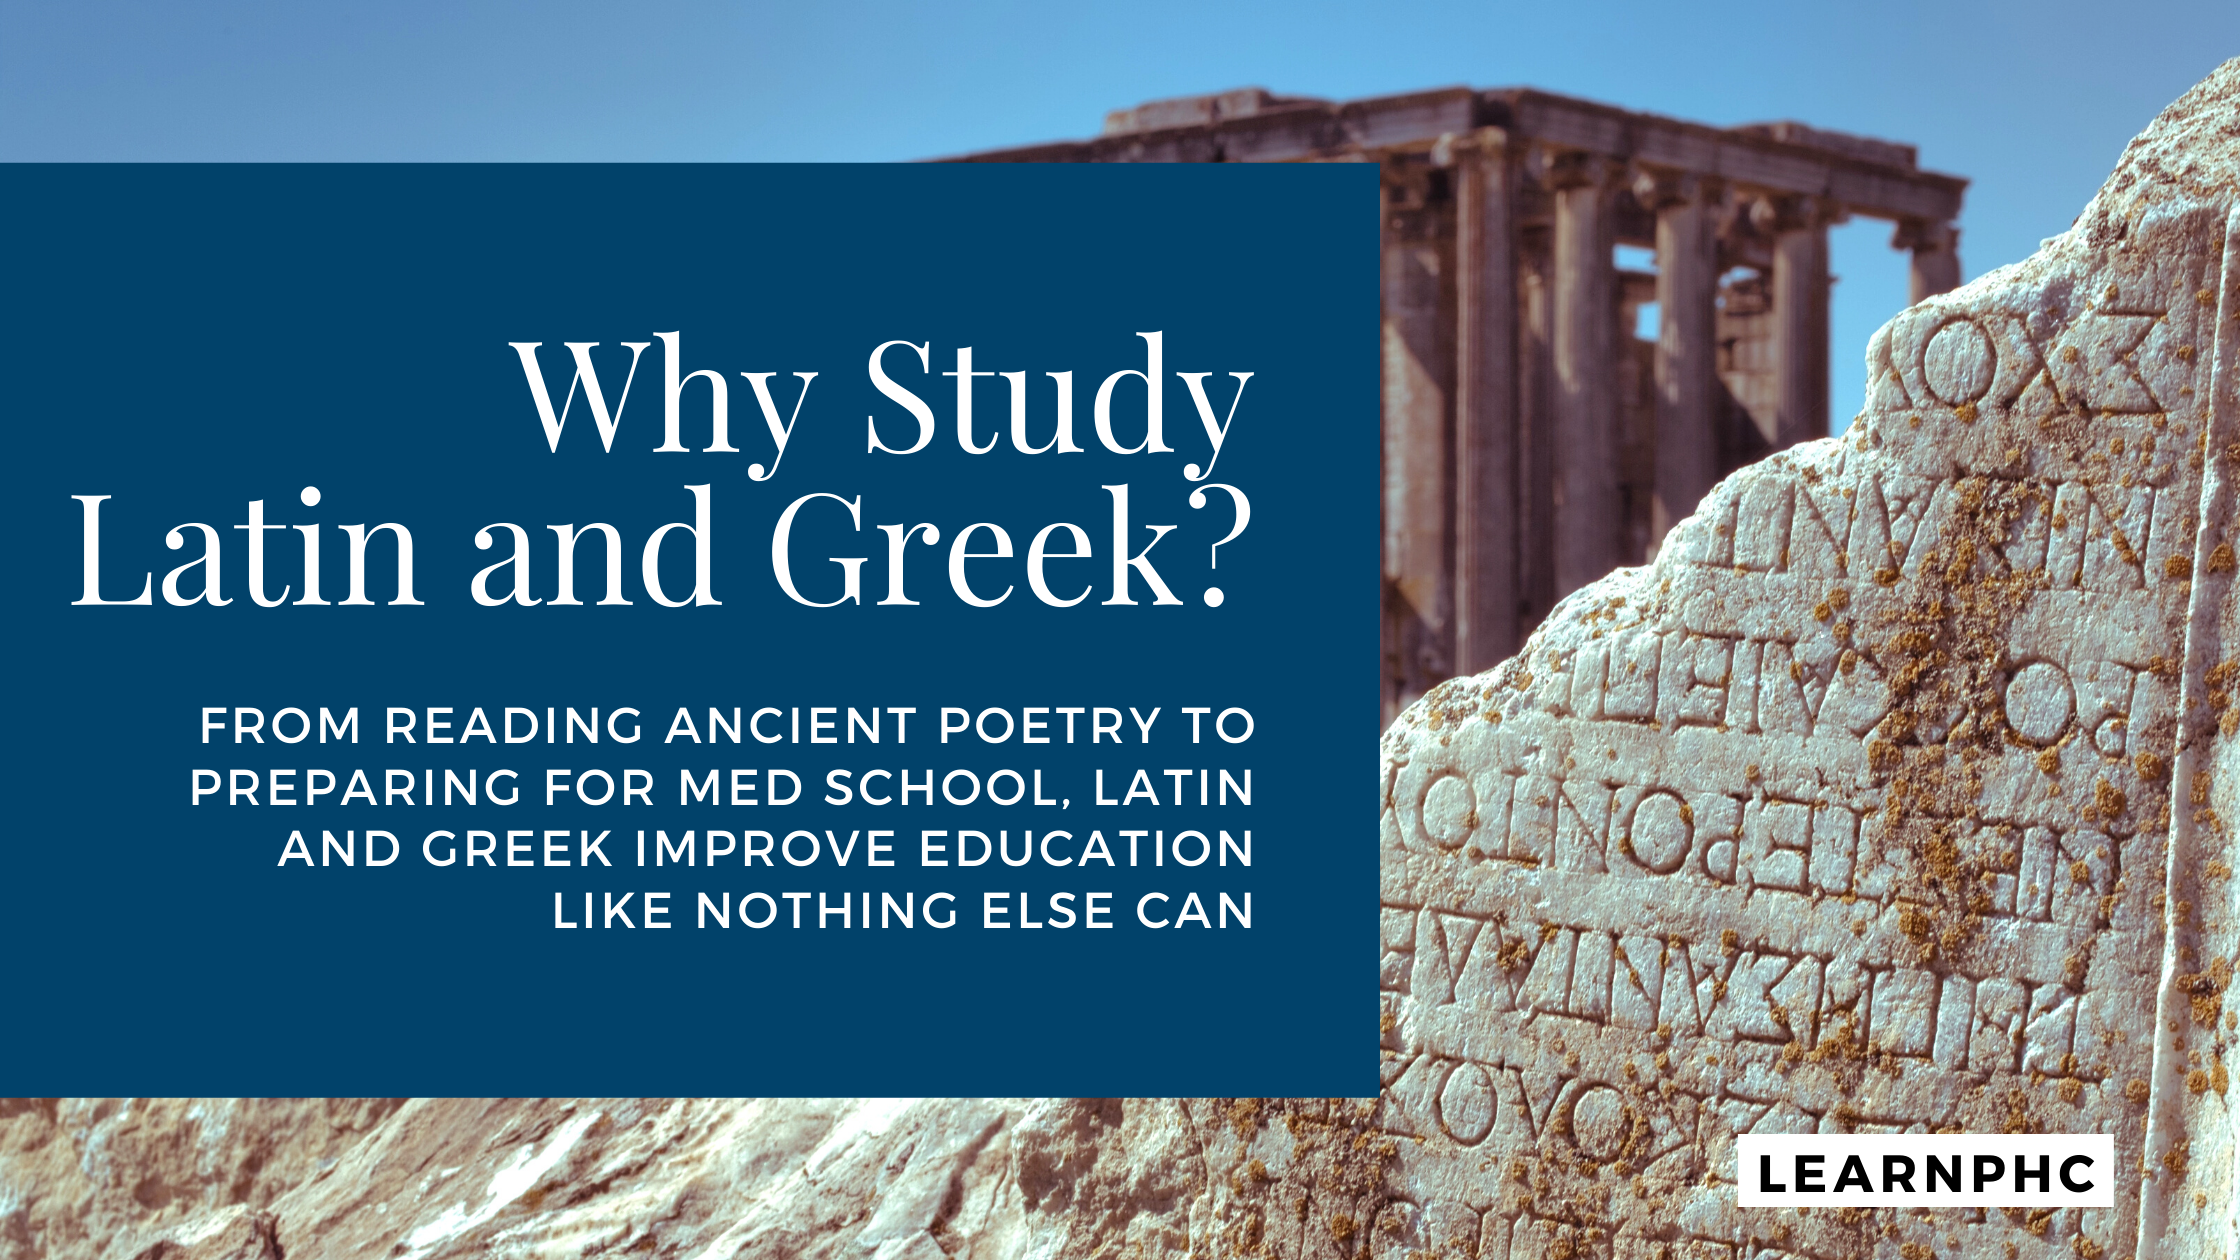 Why Study Latin and Greek?